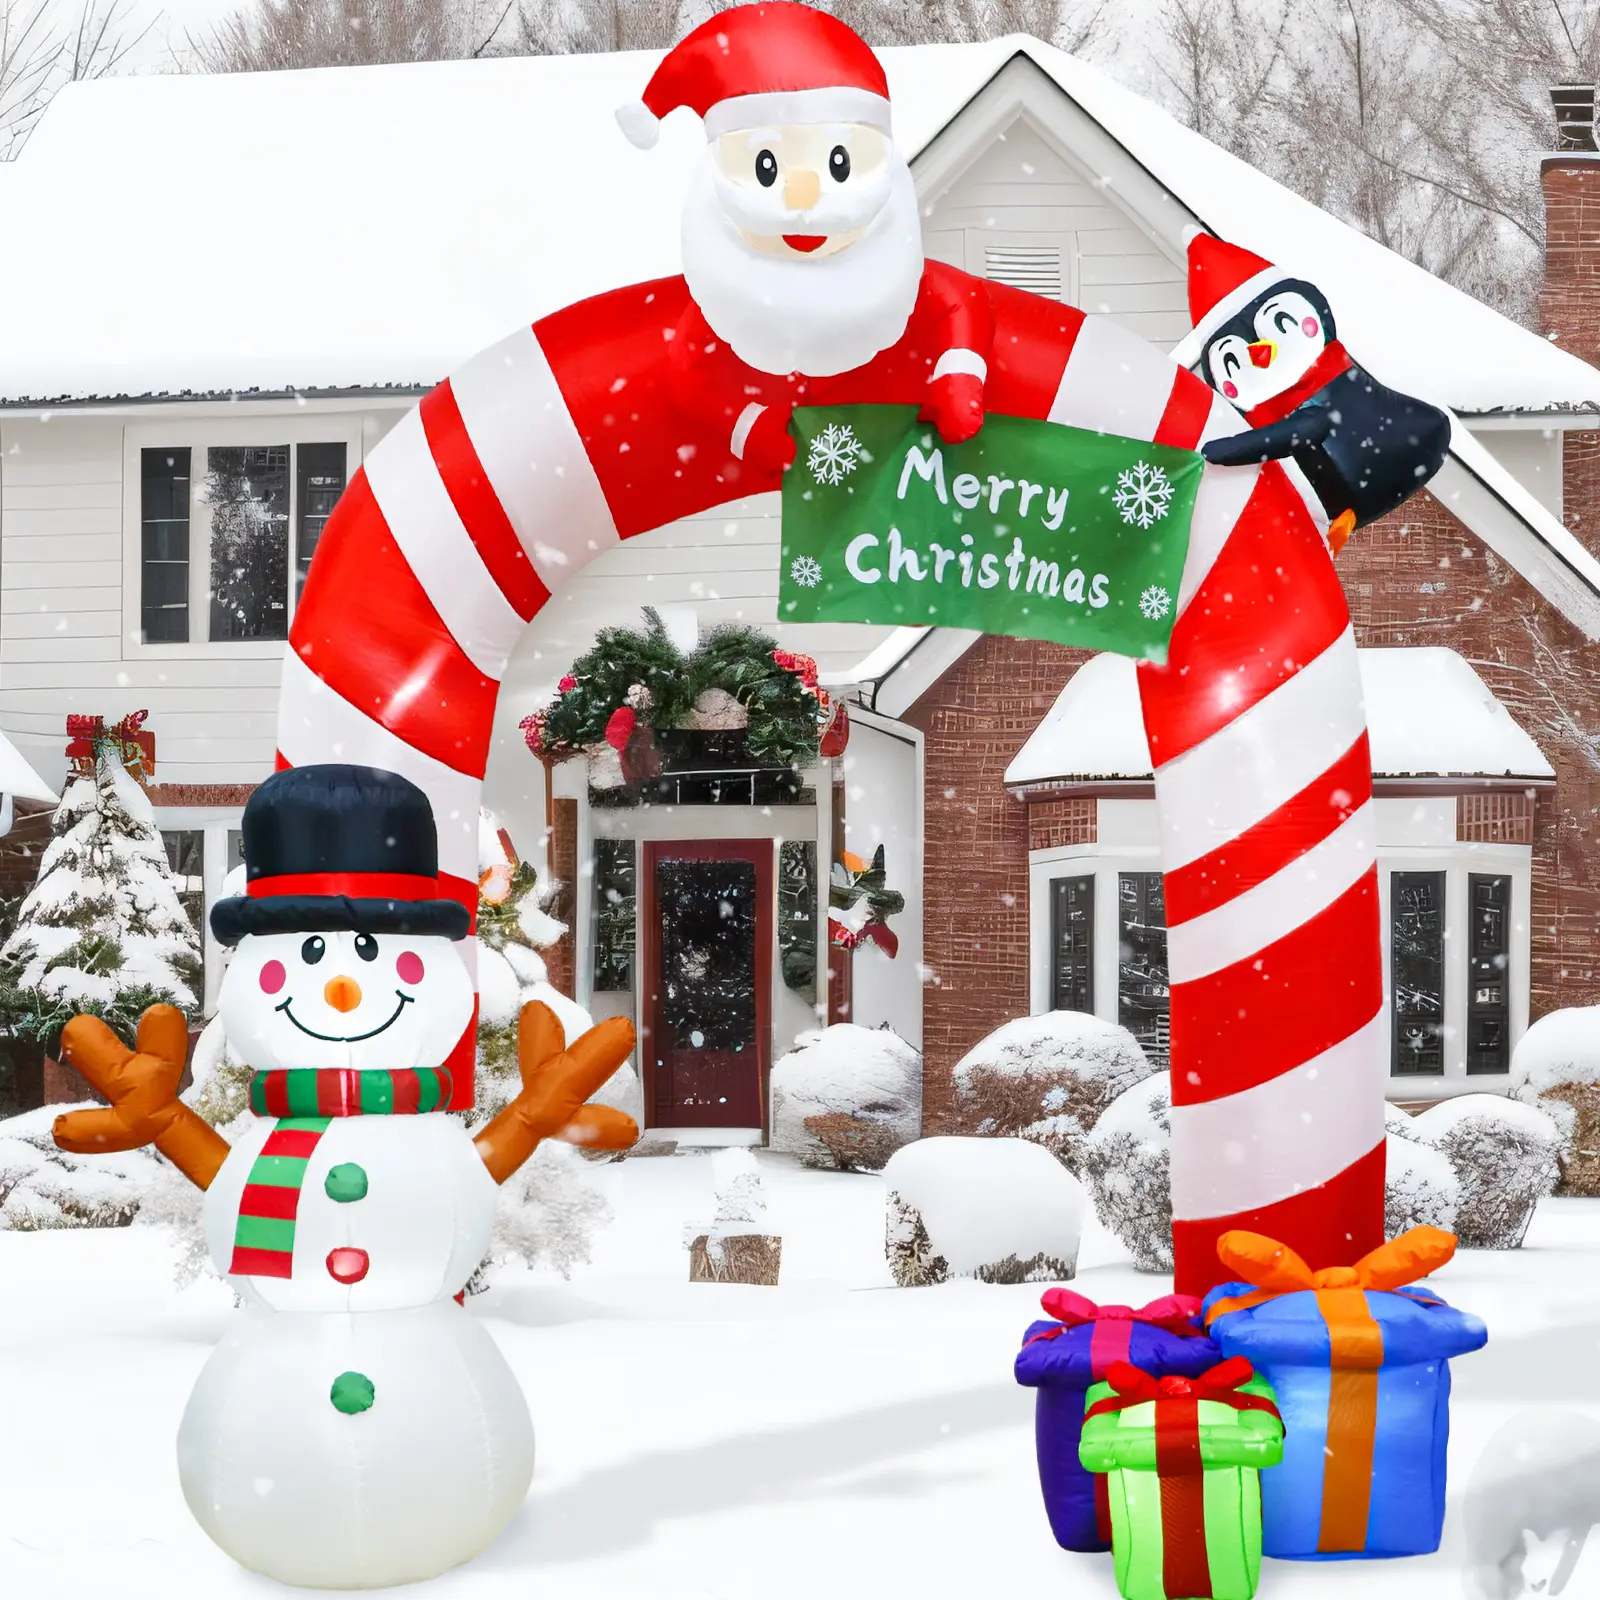 OurWarm 8FT คริสต์มาสInflatables Candy Can ArchwayซานตาเพนกวินและSnowman Inflatable Archระเบิดตกแต่งลาน